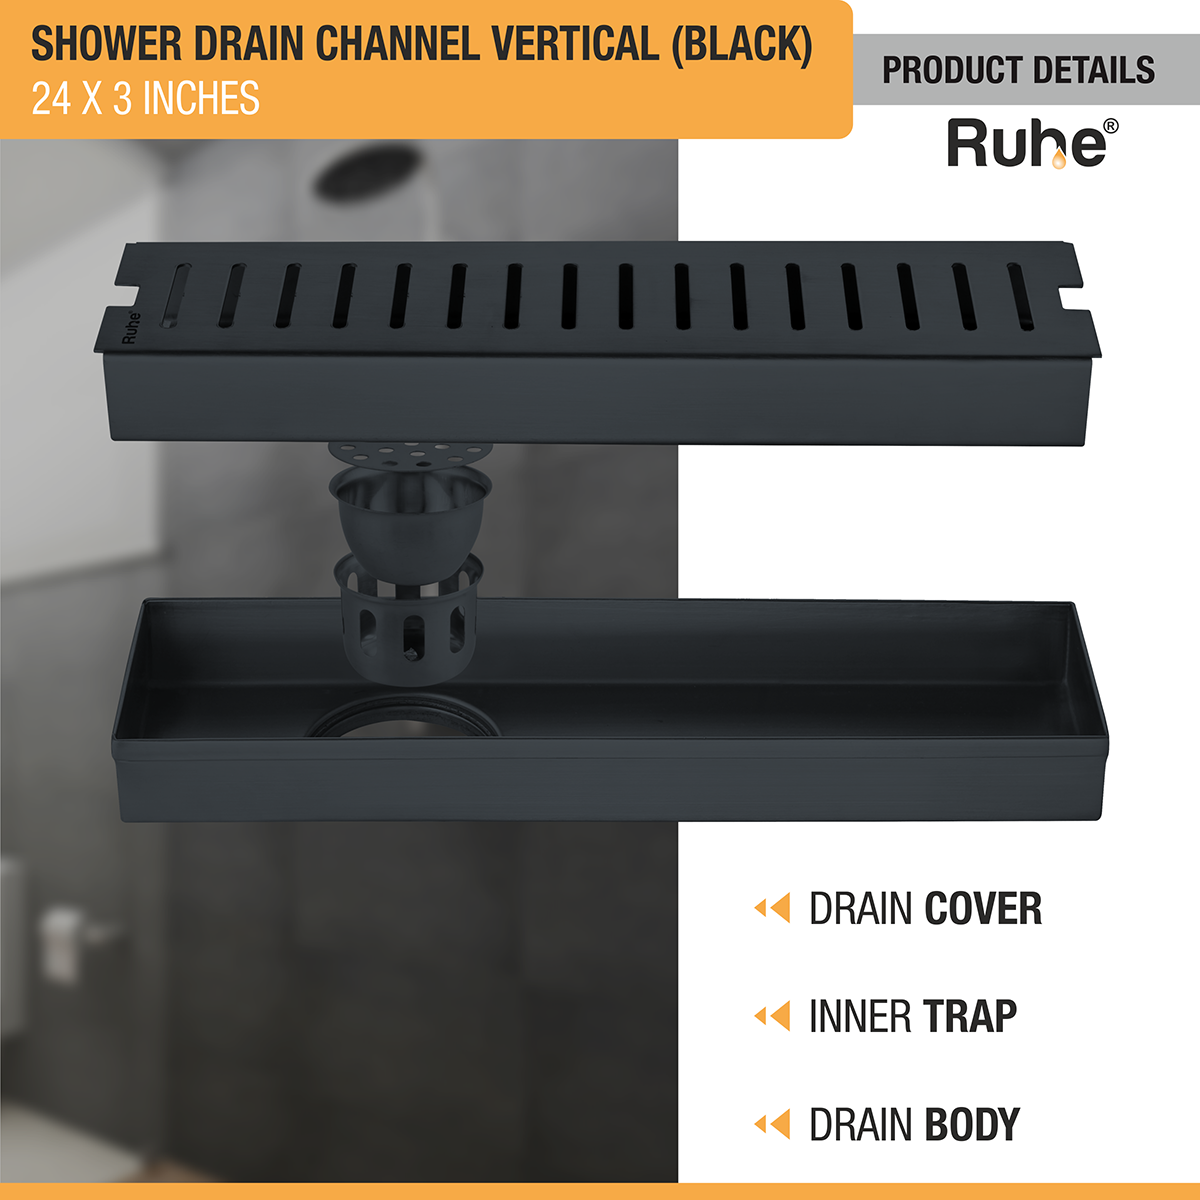 Vertical Shower Drain Channel (24 x 3 Inches) Black PVD Coated with drain cover, inner insect trap, drain body